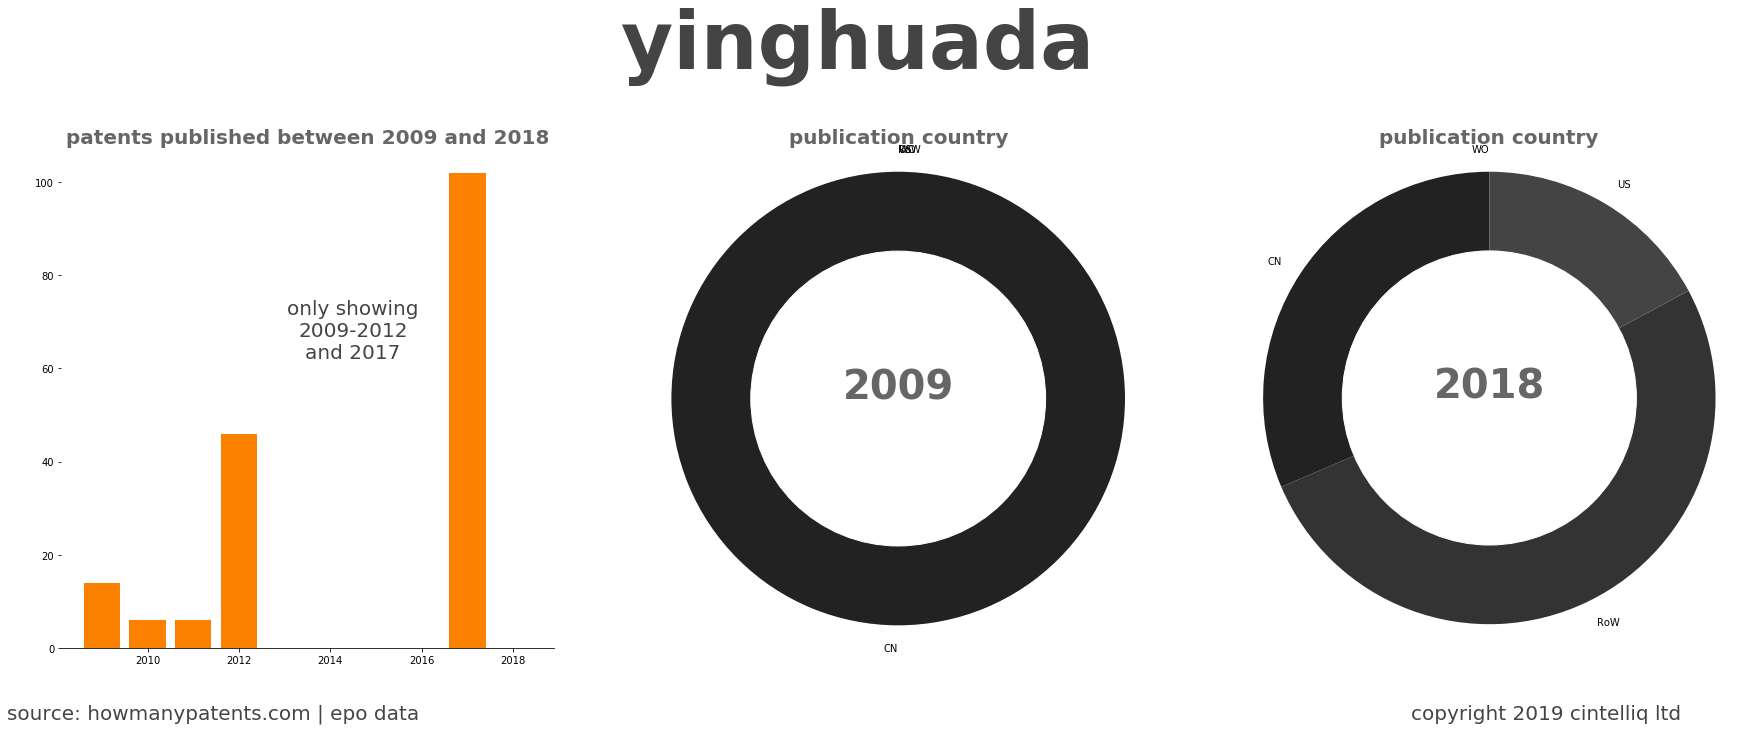 summary of patents for Yinghuada 